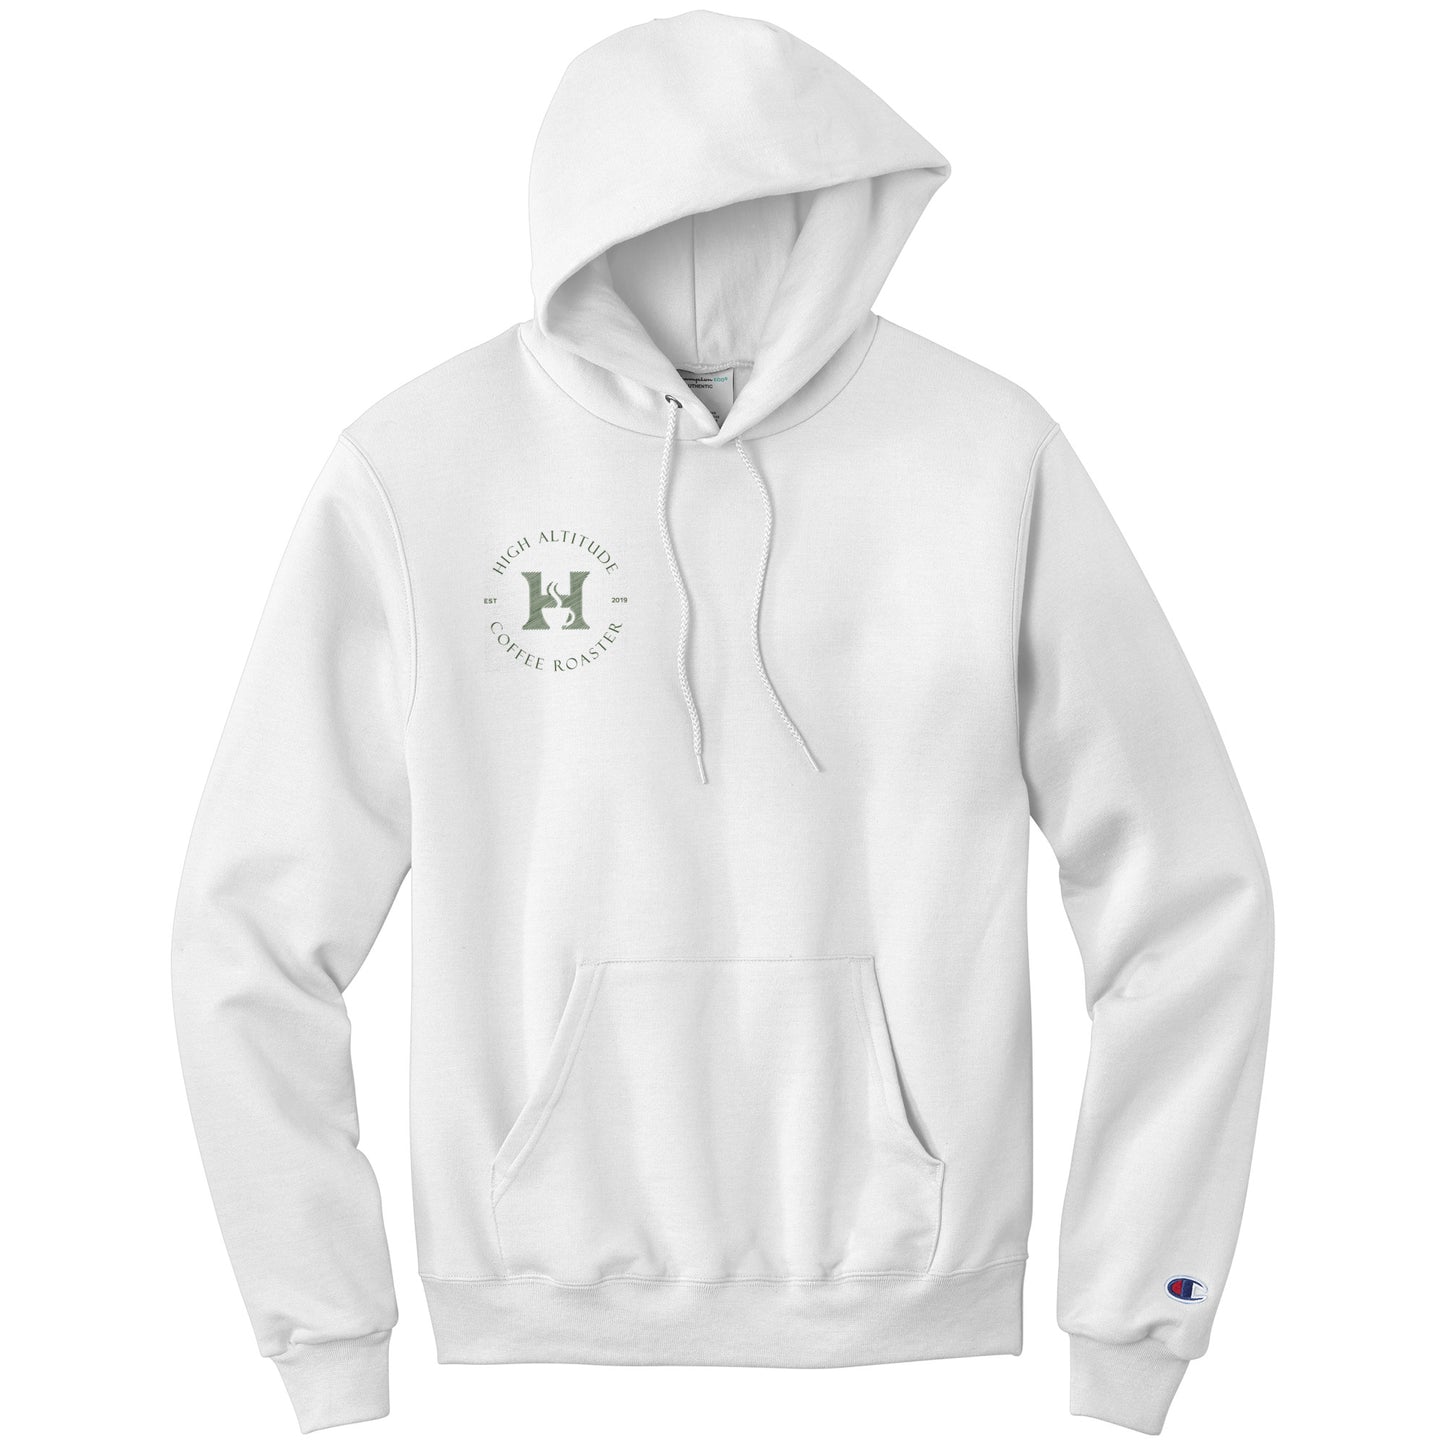 Relax on Pagosa Time Hoodie